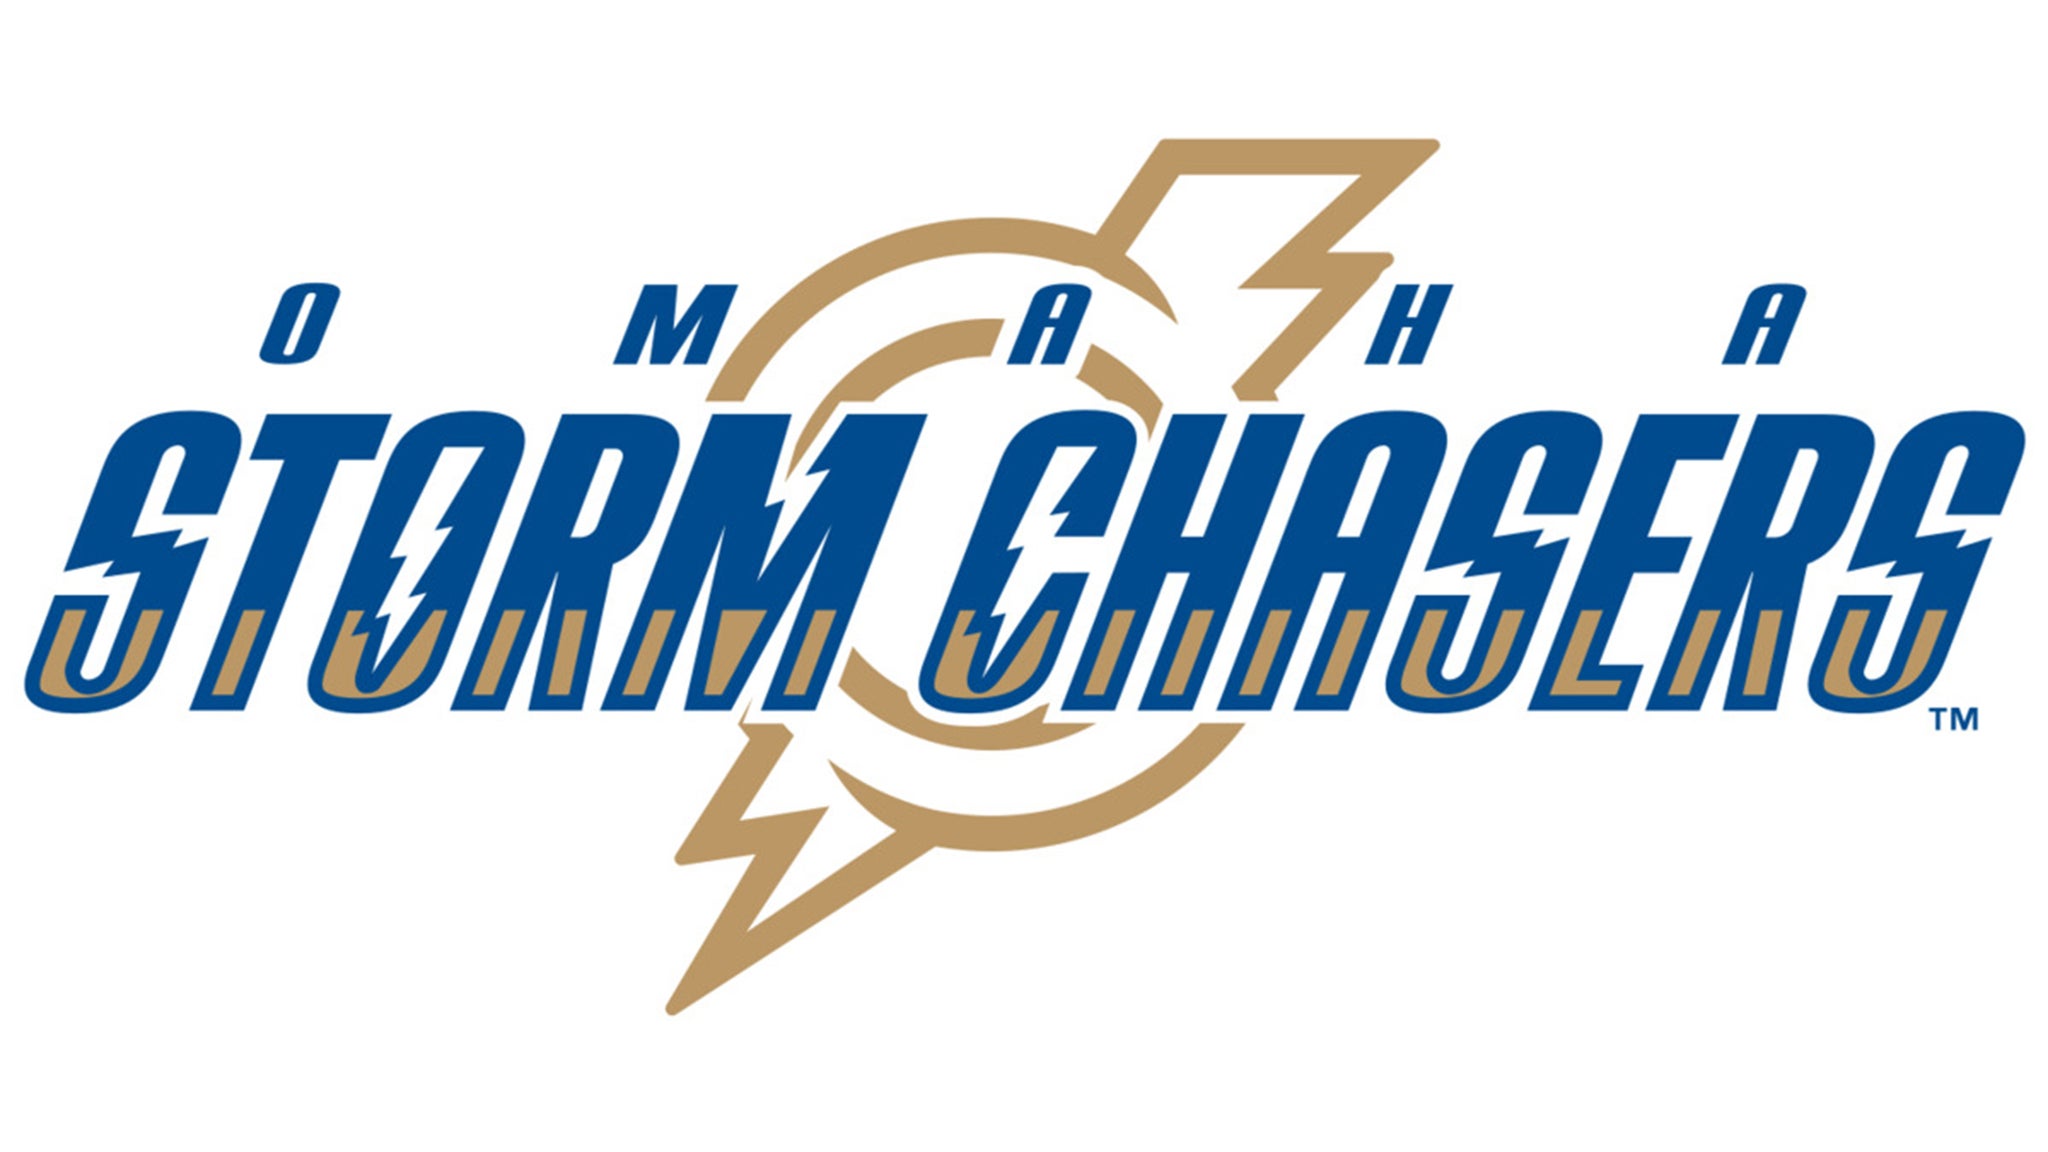 Omaha Storm Chasers vs. Indianapolis Indians